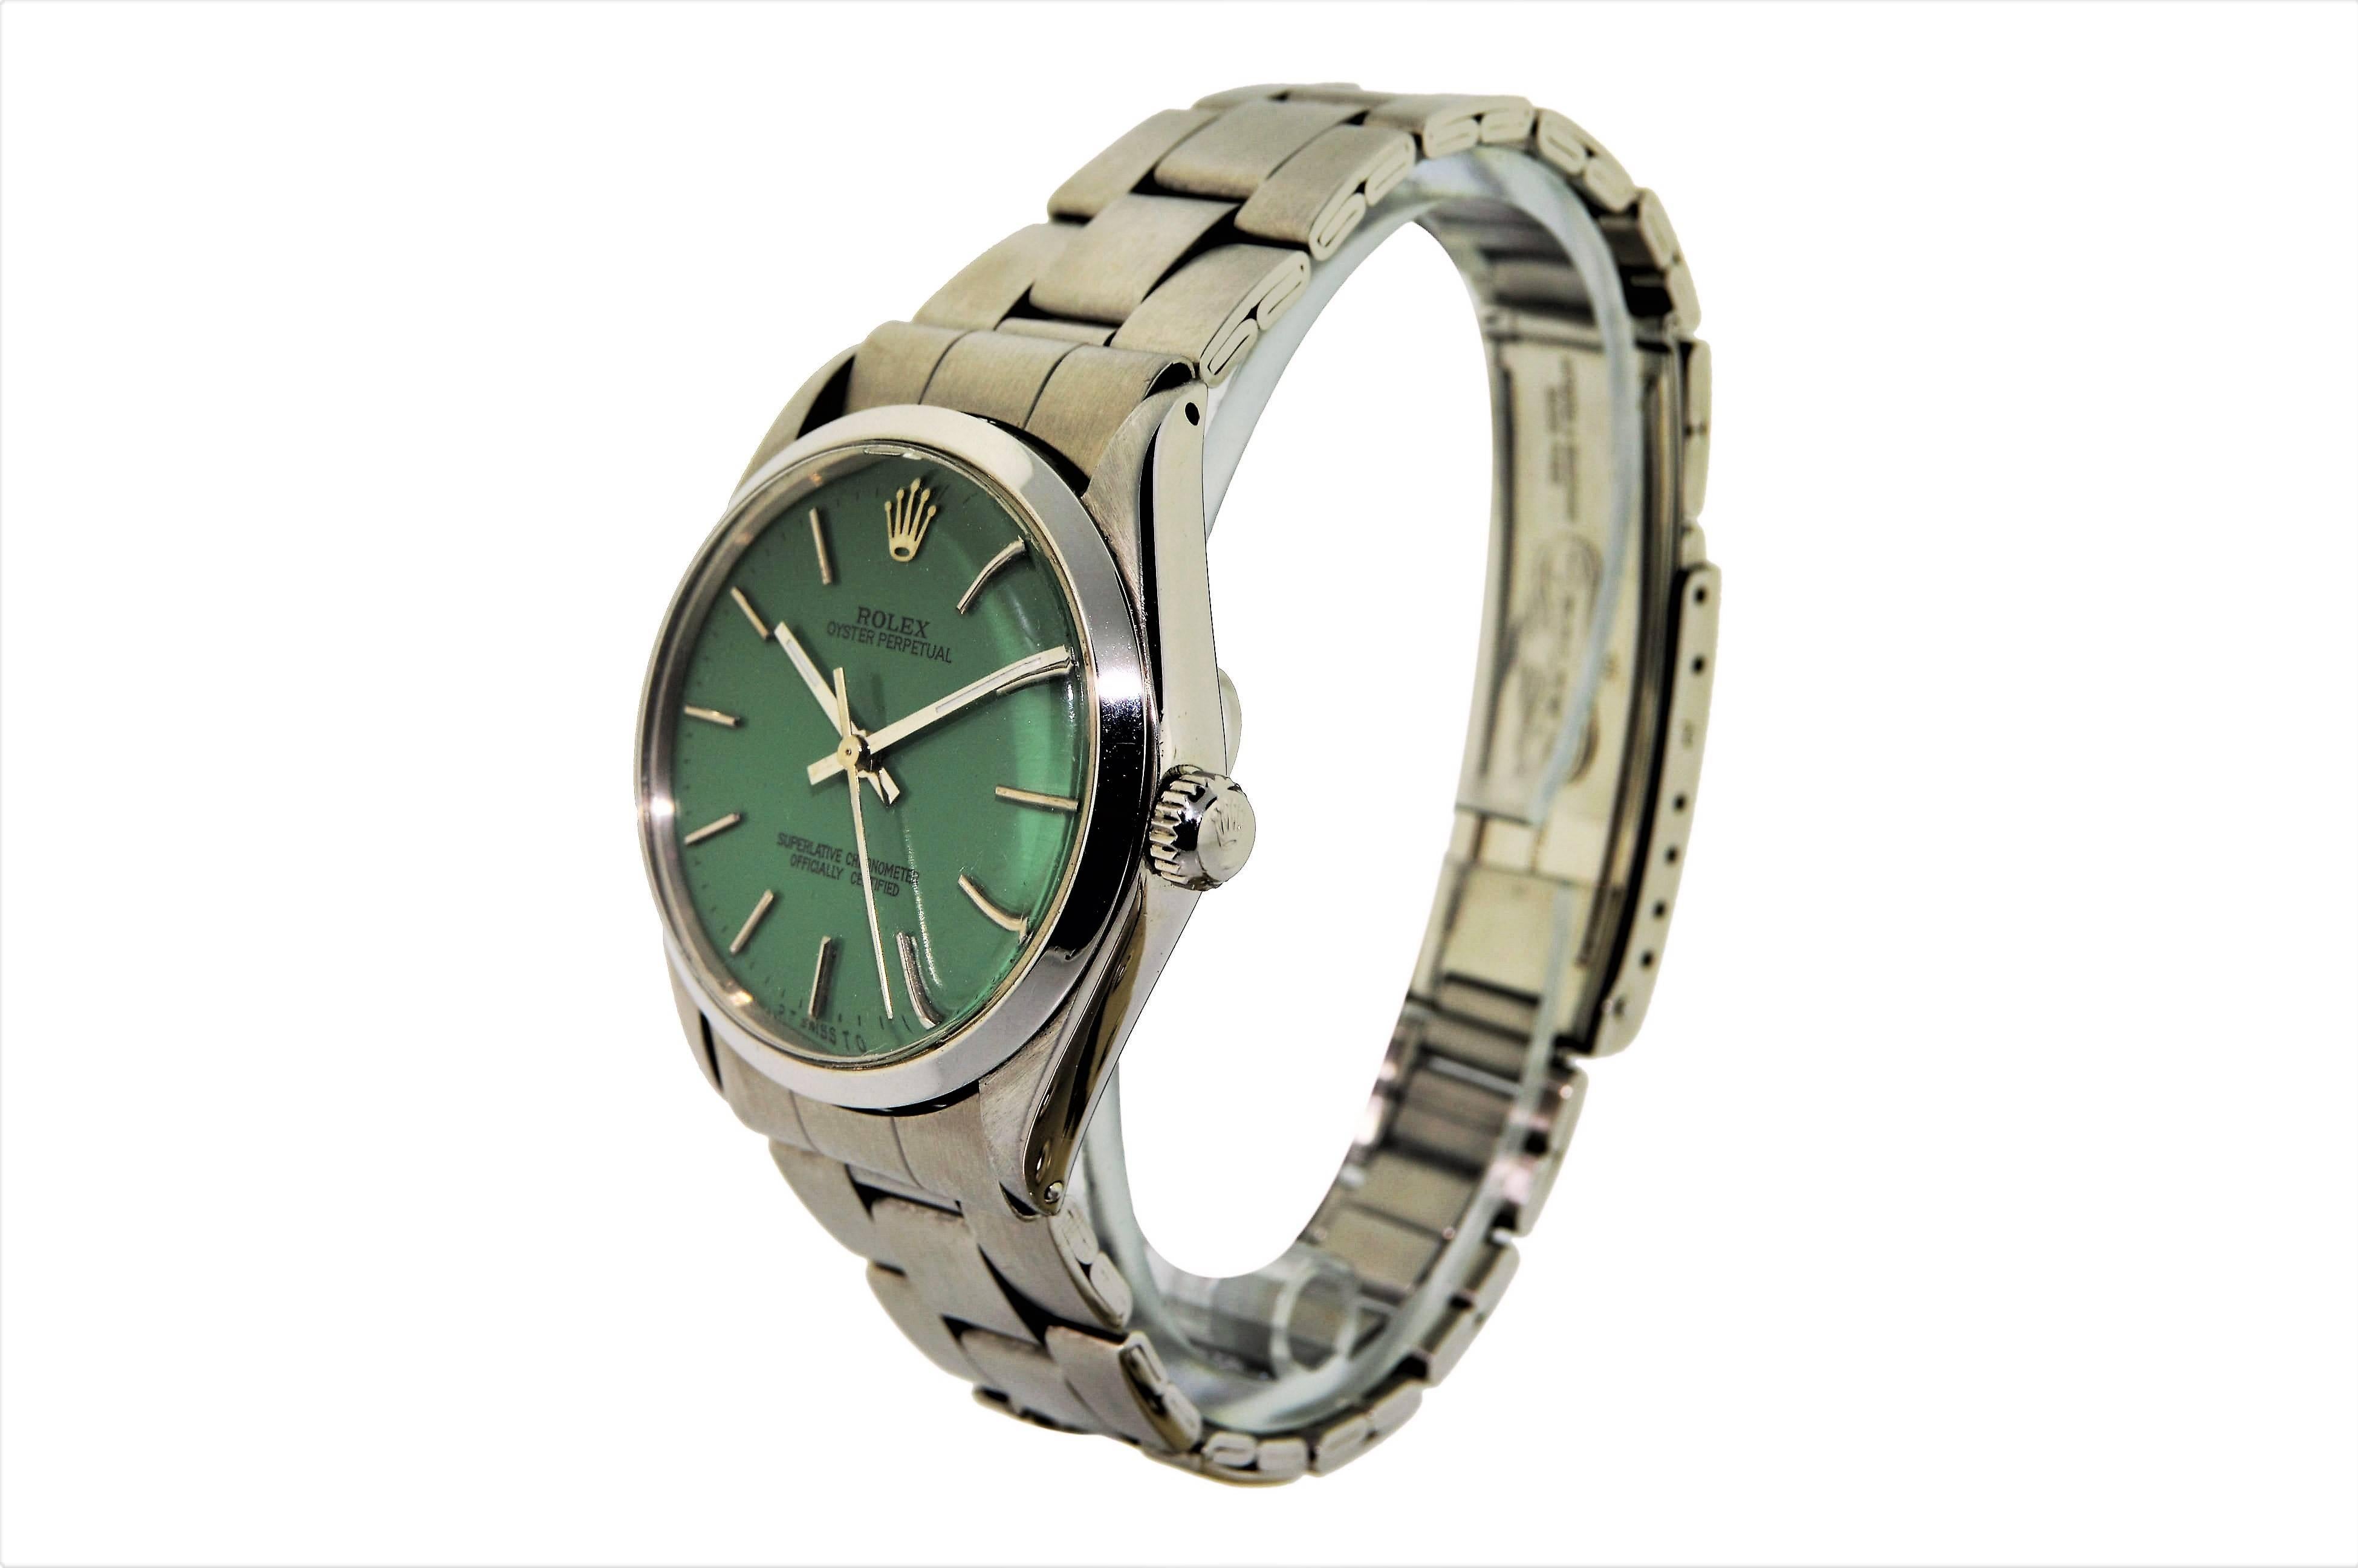 FACTORY / HOUSE: Rolex Watch Company
STYLE / REFERENCE: Oyster Perpetual / 5500
METAL: Stainless Steel 
CIRCA: 1970's
MOVEMENT / CALIBER: 26 Jewels / 1570
DIAL / HANDS: Original Dial with Non Original Green Finish / Baton Hands
DIMENSIONS:  39mm X 